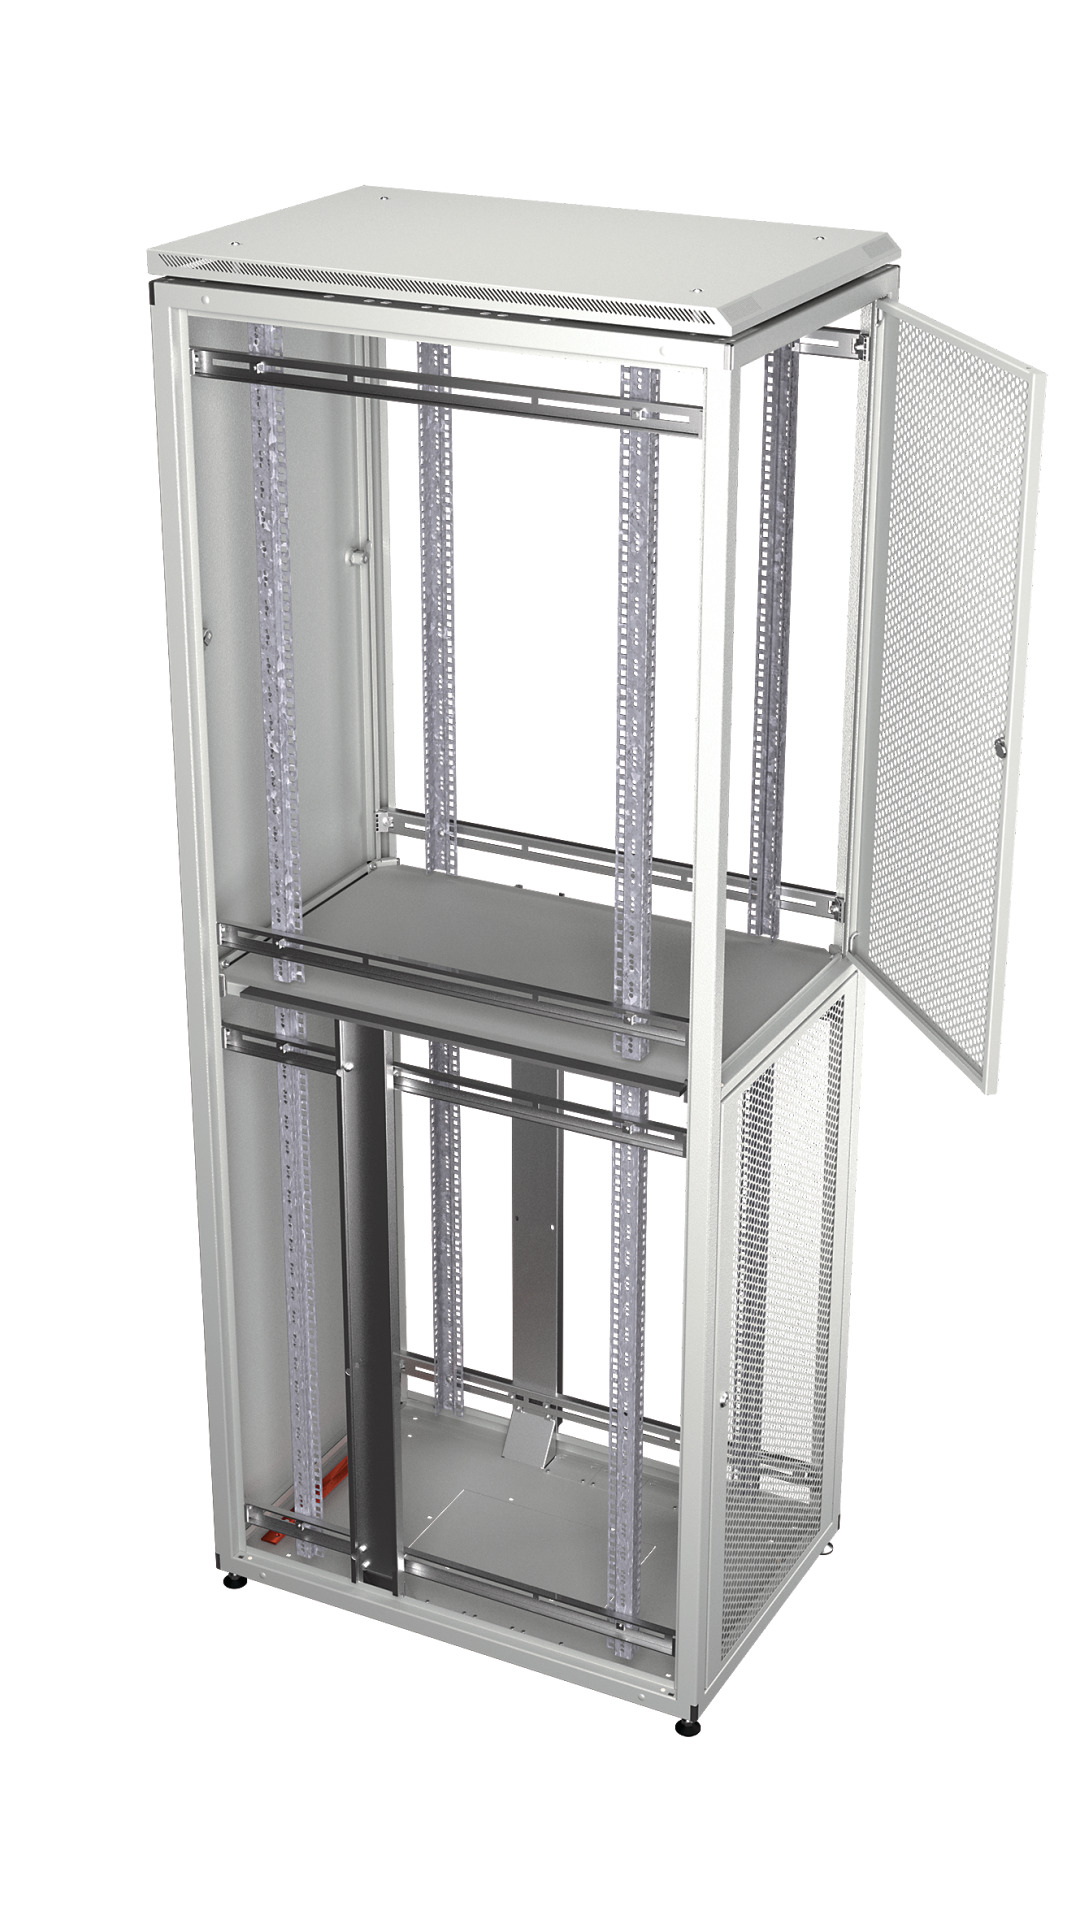 Co-Location Rack PRO, 4 x 11U, 600x1000 mm, F+R 1-Part Perforated, RAL7035